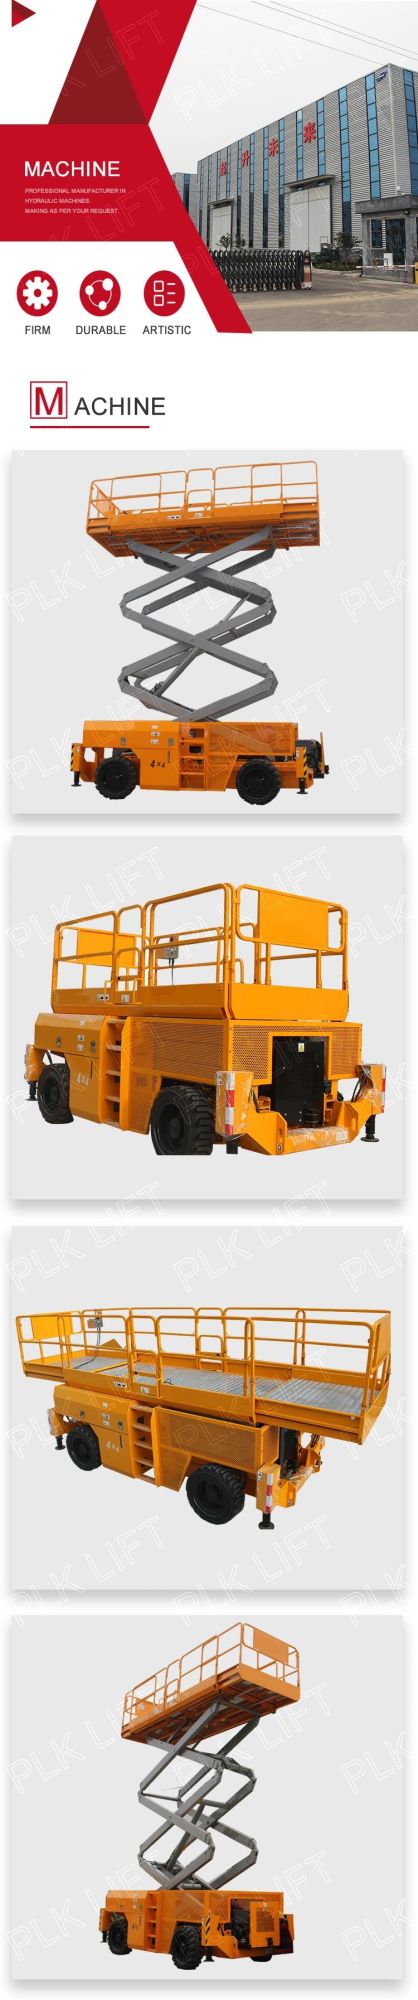 EU USA Track Crawler Scissor Lift with Automatic Leveling Hydraulic Outriggers